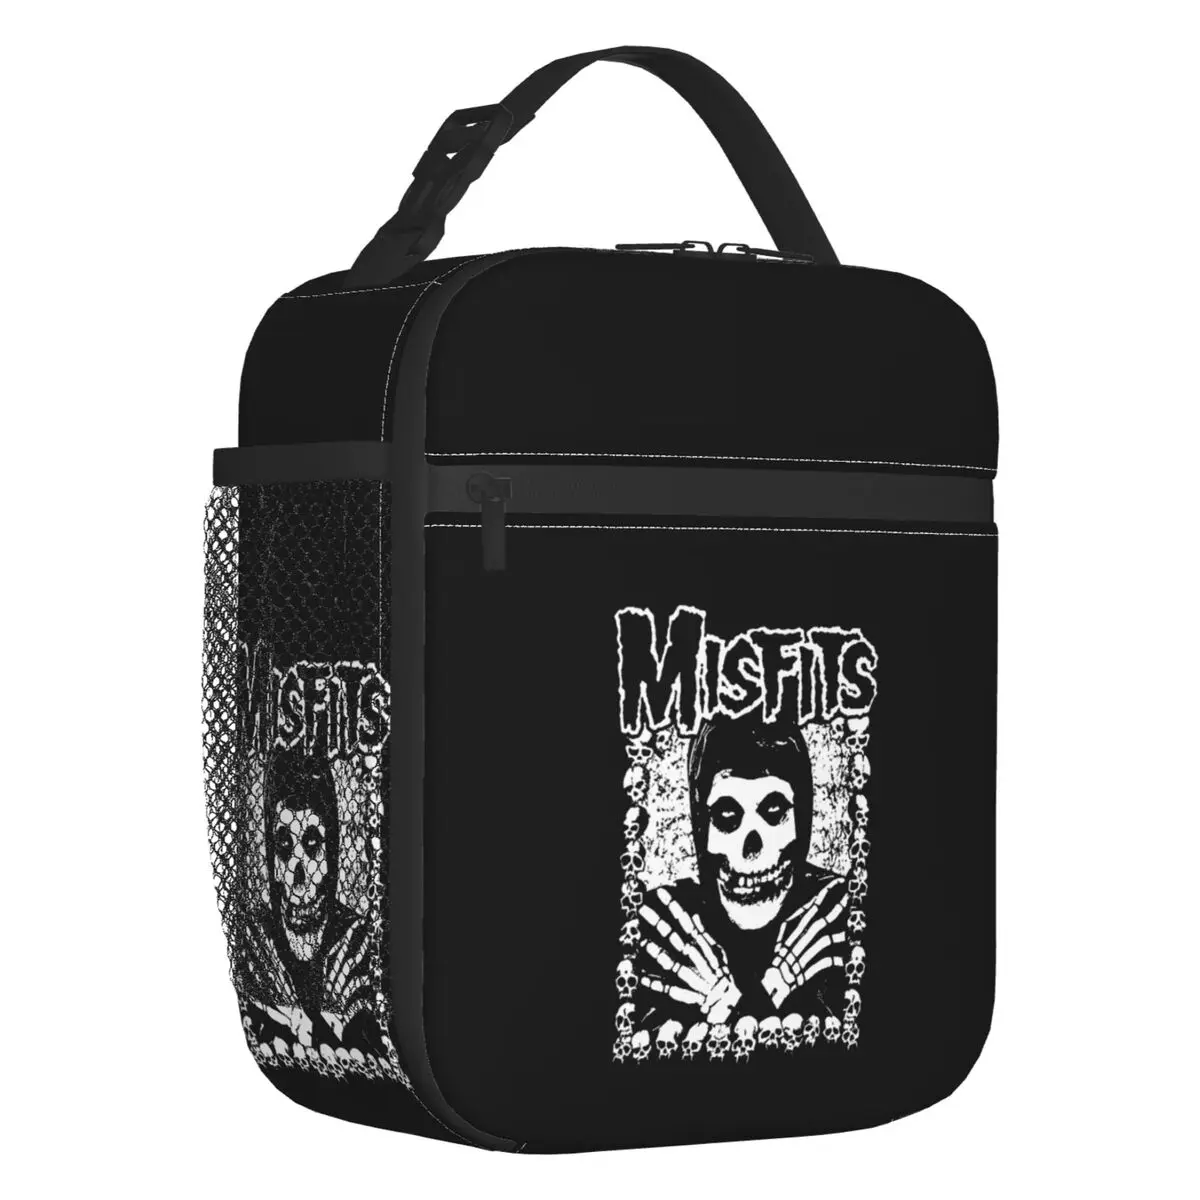 

Misfits Rock Punk Skull Insulated Lunch Bag for Women Waterproof Cooler Thermal Bento Box Office Picnic Travel